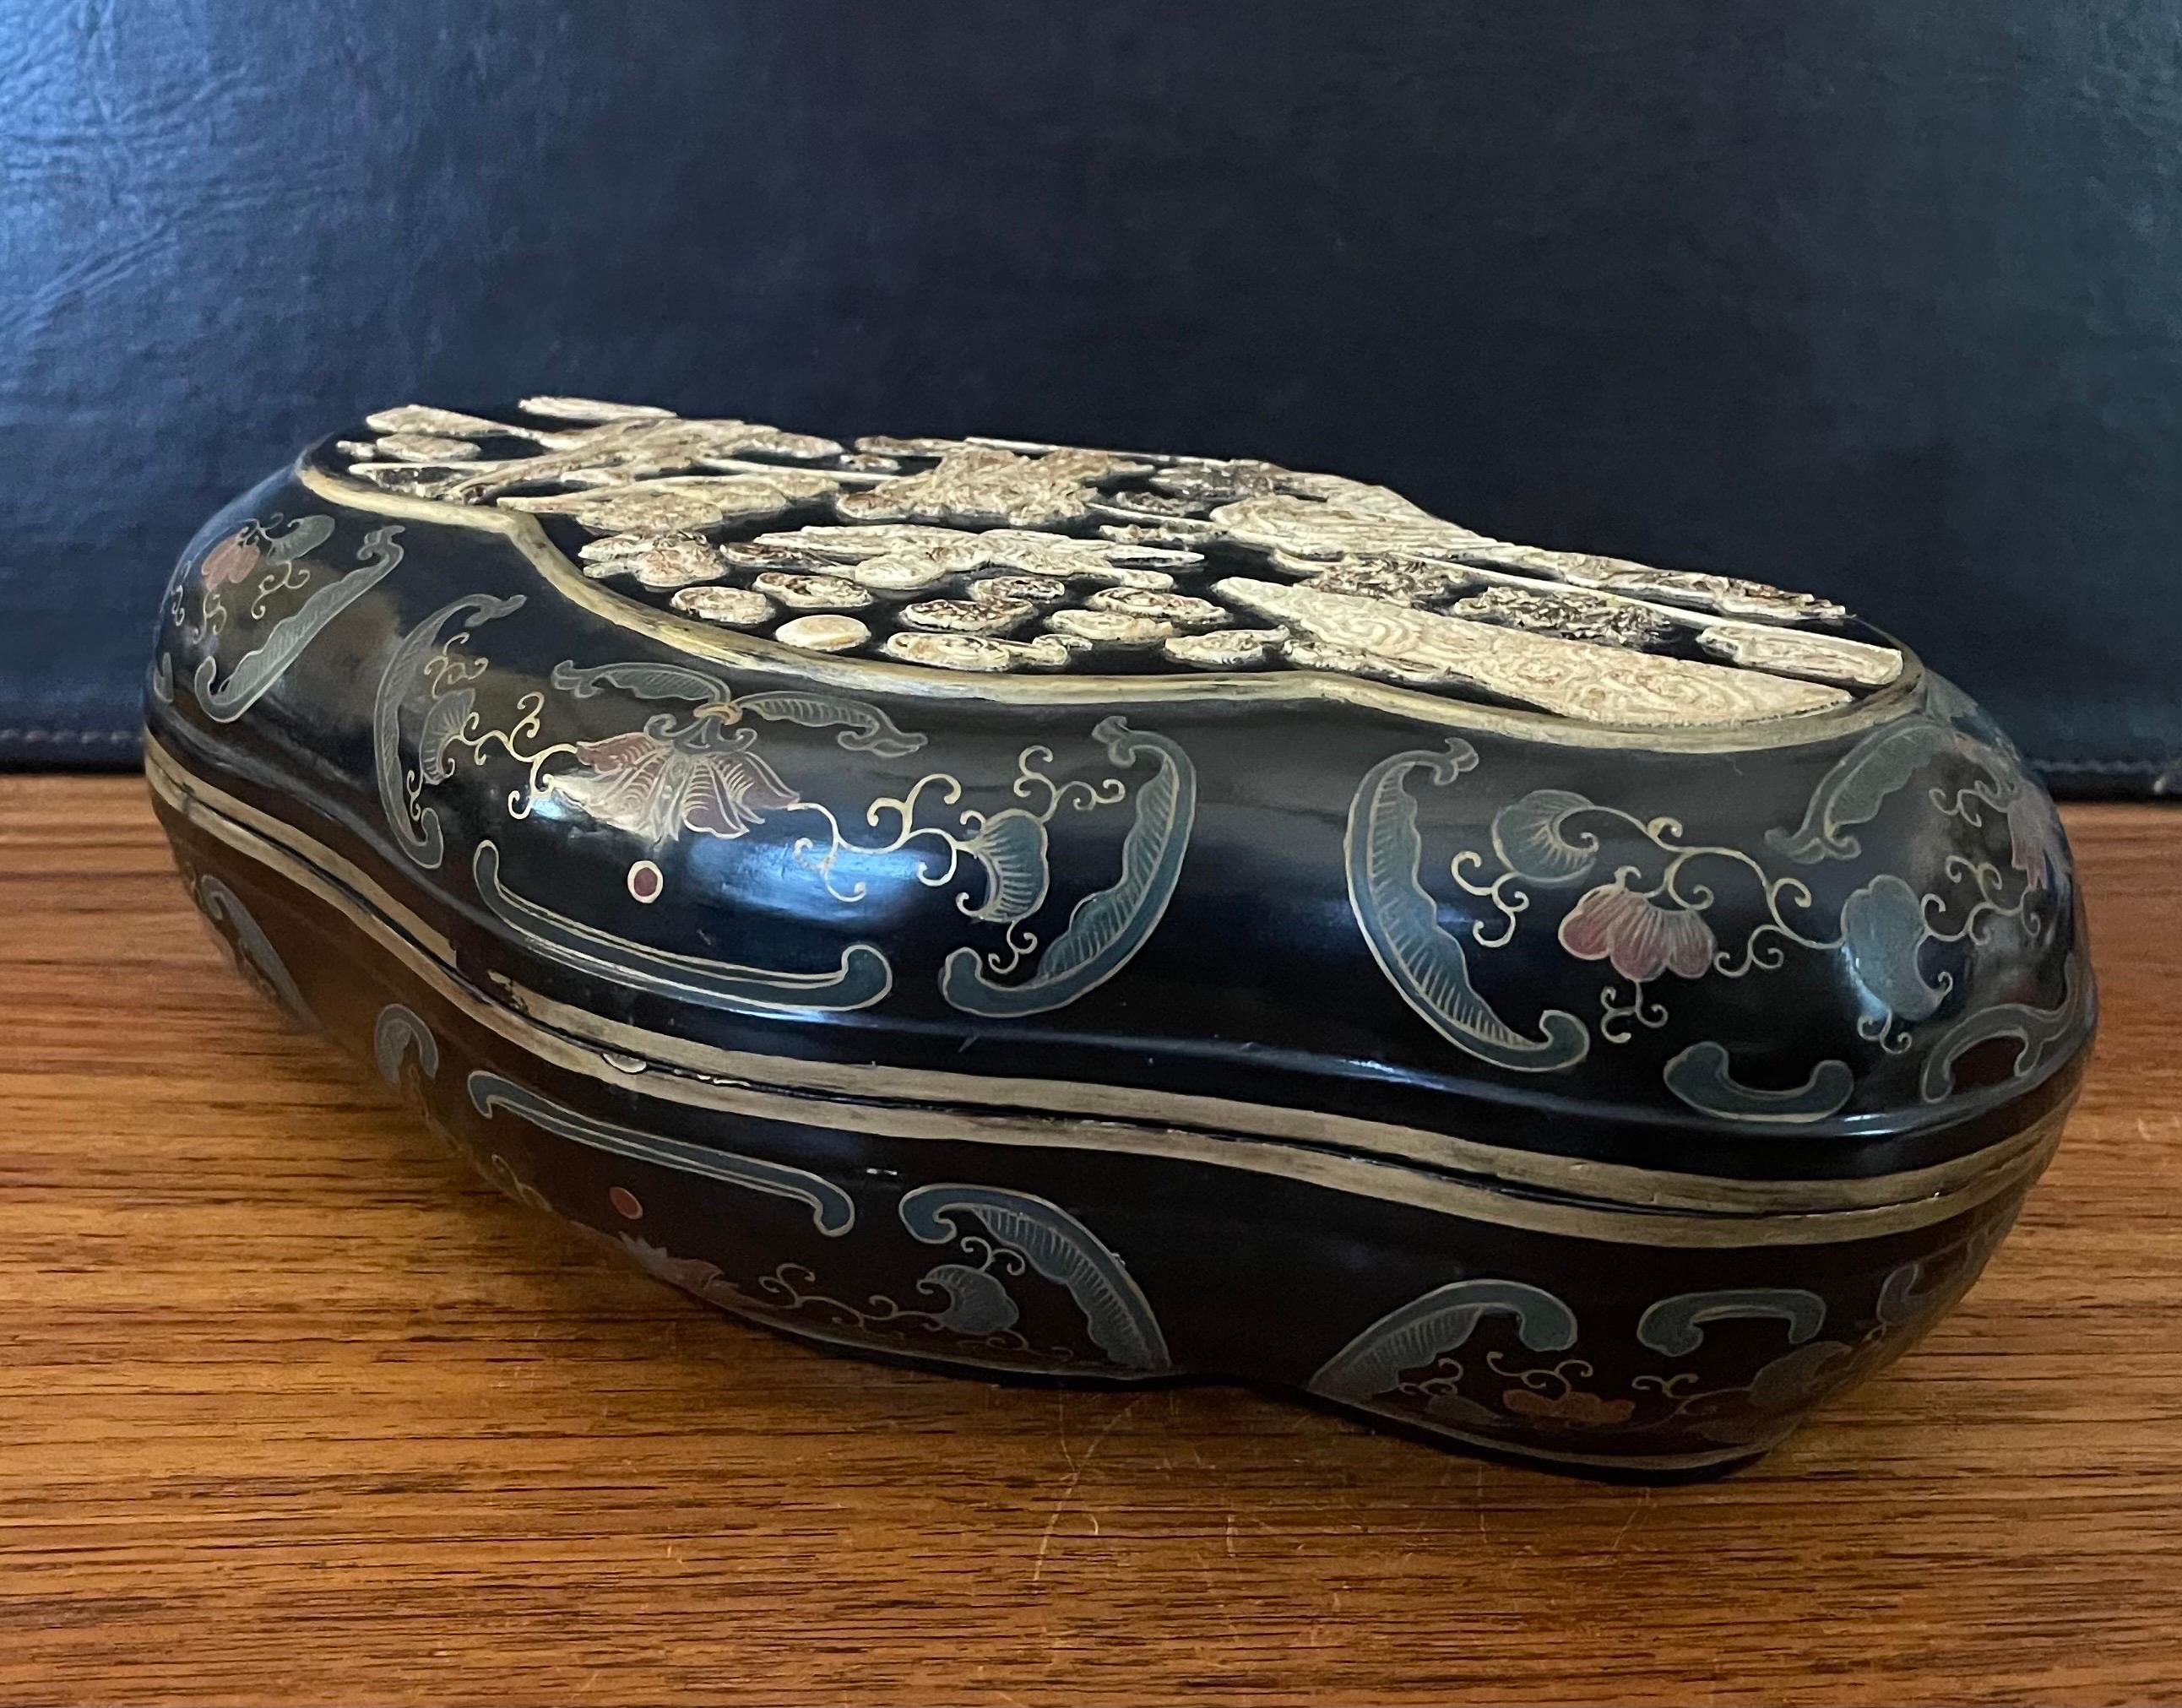 A wonderful hand-painted Chinese lidded black lacquer box, circa 1940s. The handcrafted box measures 13.5